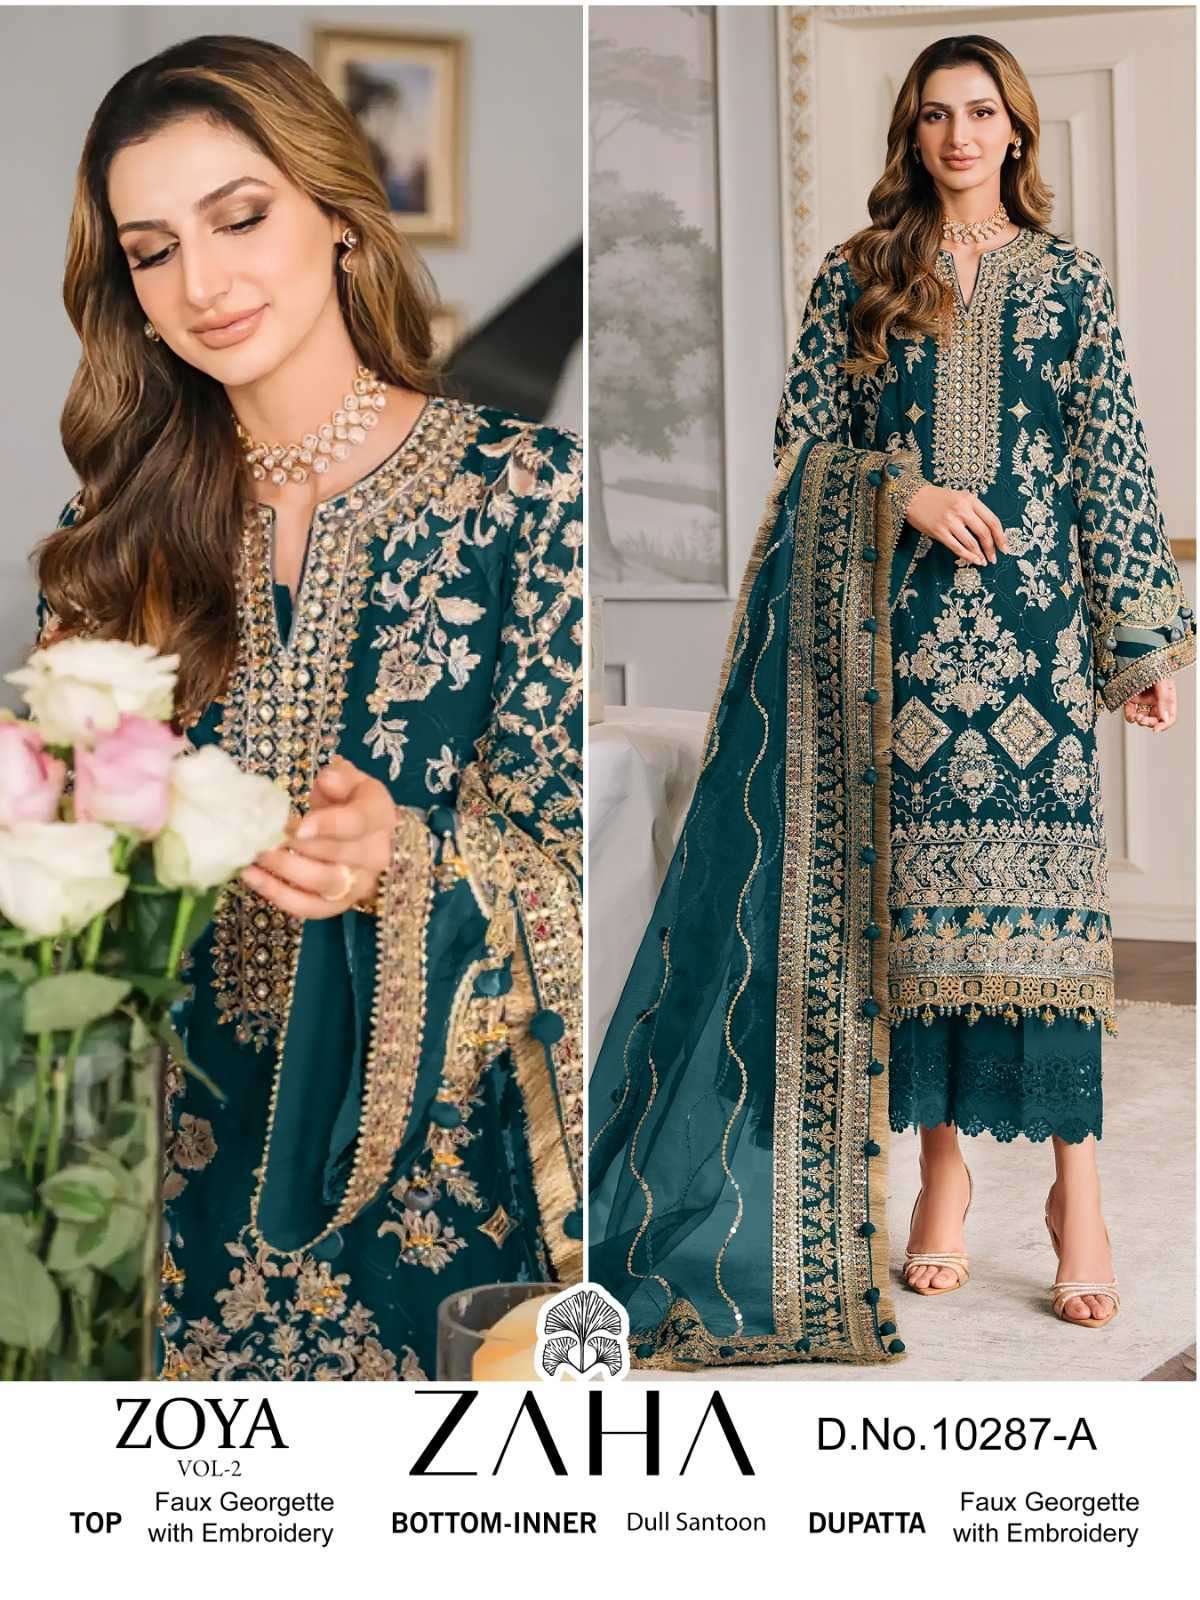 ZOYA VOL-2 SERIES 10287 BY ZAHA DESIGNER EMBROIDERY WORK GEORGETTE PAKISTANI STYLE SUITS ARE AVAILABLE AT WHOLESALE PRICE